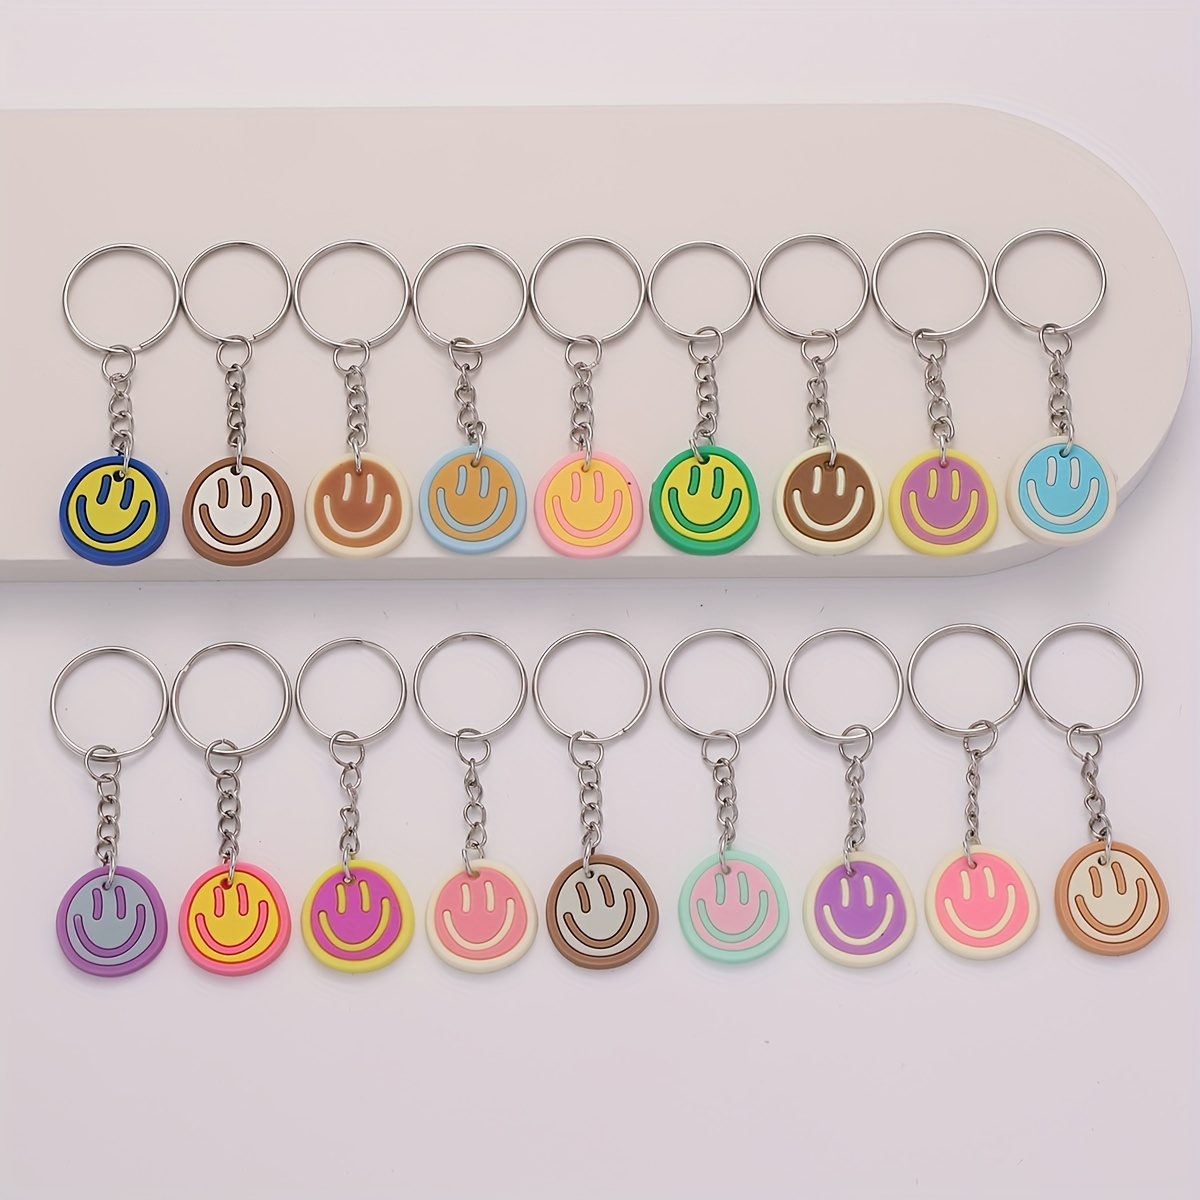 

18pcs Cartoon Smile Face Keychain Cute Pvc Key Ring Luggage Purse Bag Backpack Car Charm Festival Birthday Party Favors Gift